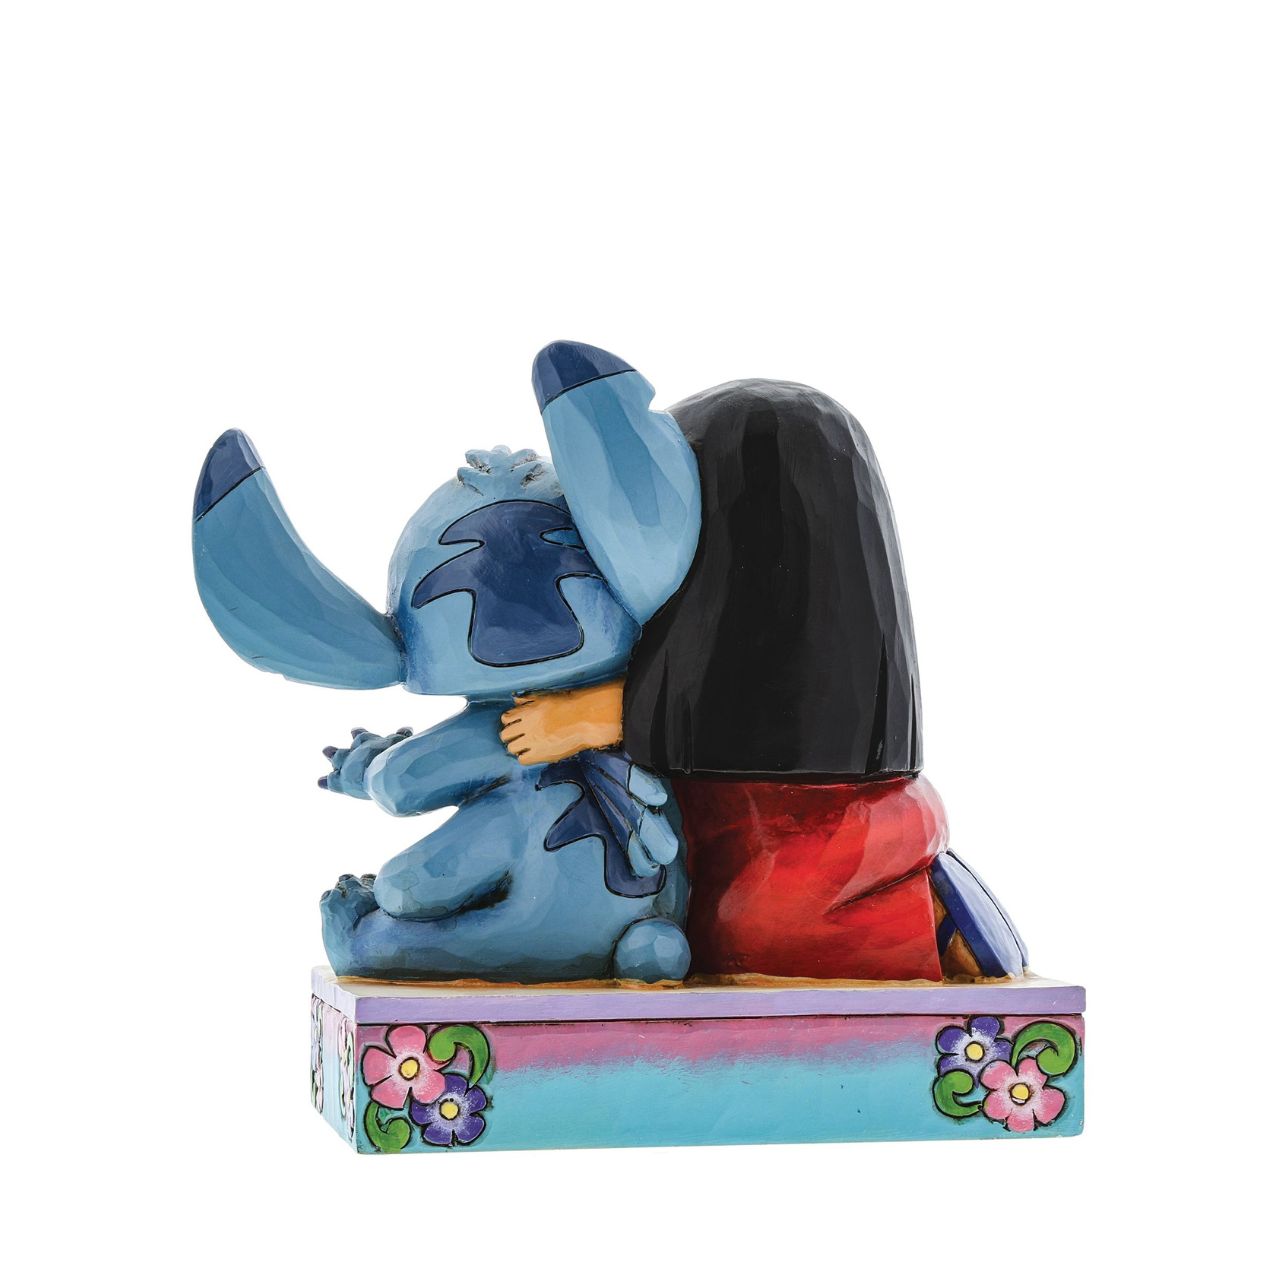 Jim Shore Ohana Means Family Lilo and Stitch Figurine  Lilo and Stitch come together in an exemplary display of Ohana which means family. This heart-warming piece has been designed by award winning artist and sculptor, Jim Shore for the Disney Traditions range.